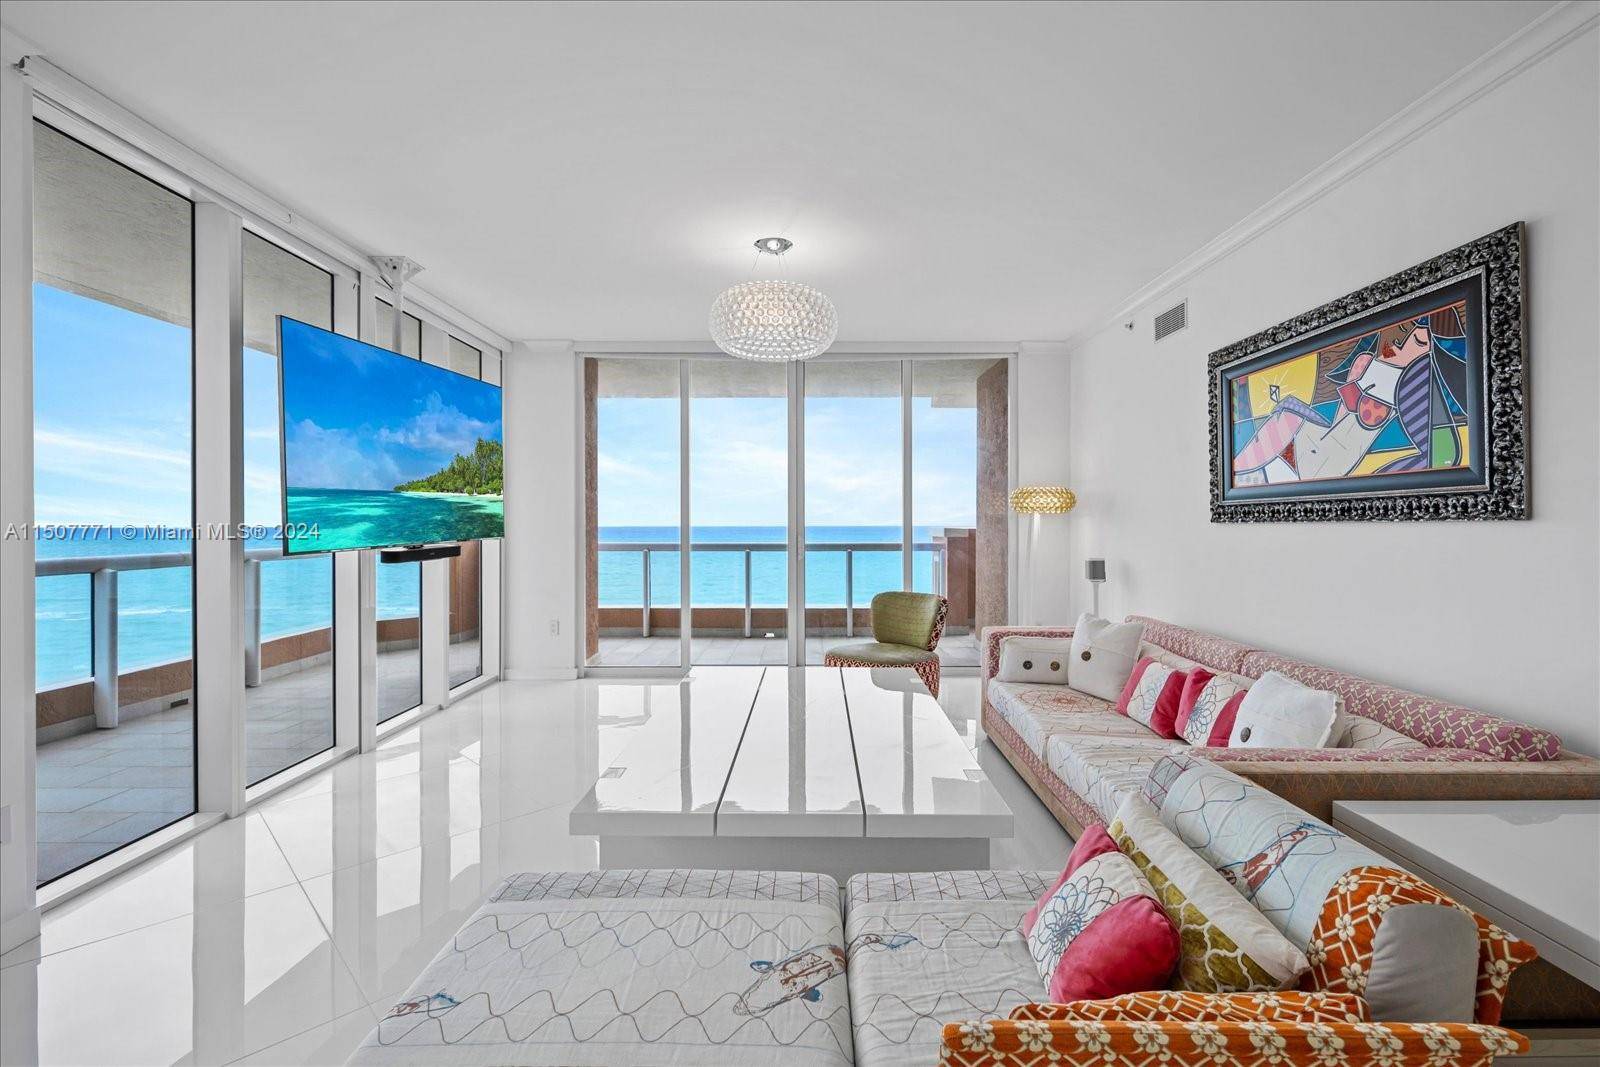 Spectacular oceanfront corner residence, completely upgraded with the most spectacular modern finishes and furnishings.